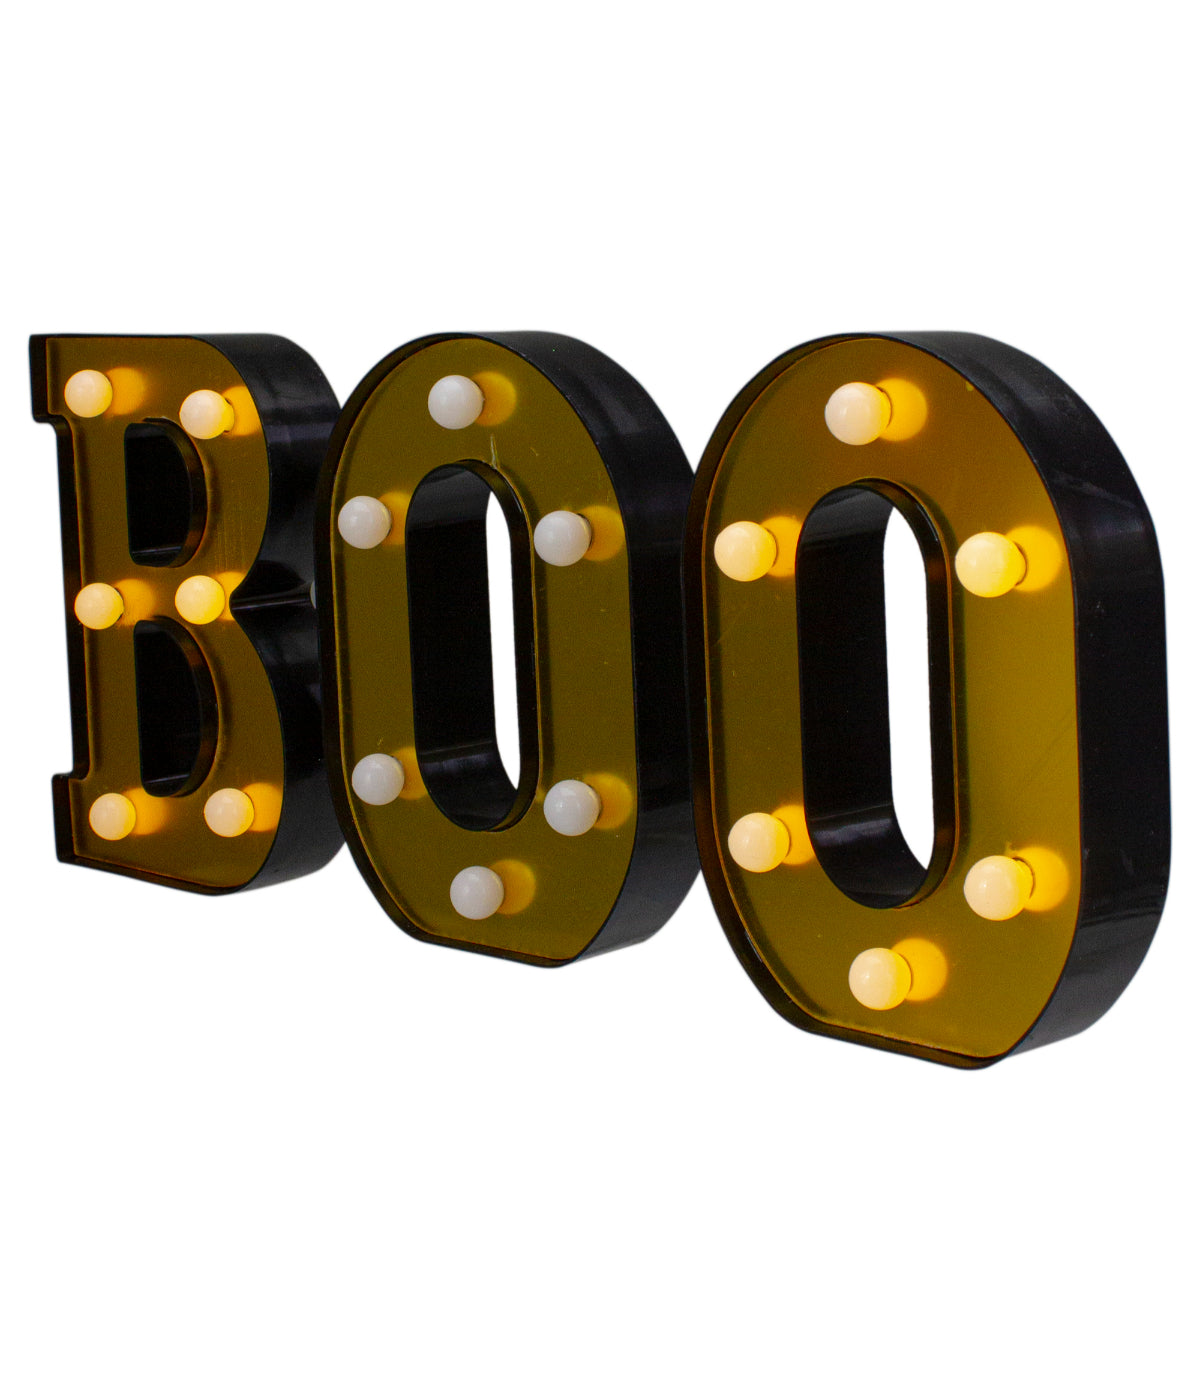 Lighted "BOO" Halloween Marquee Sign